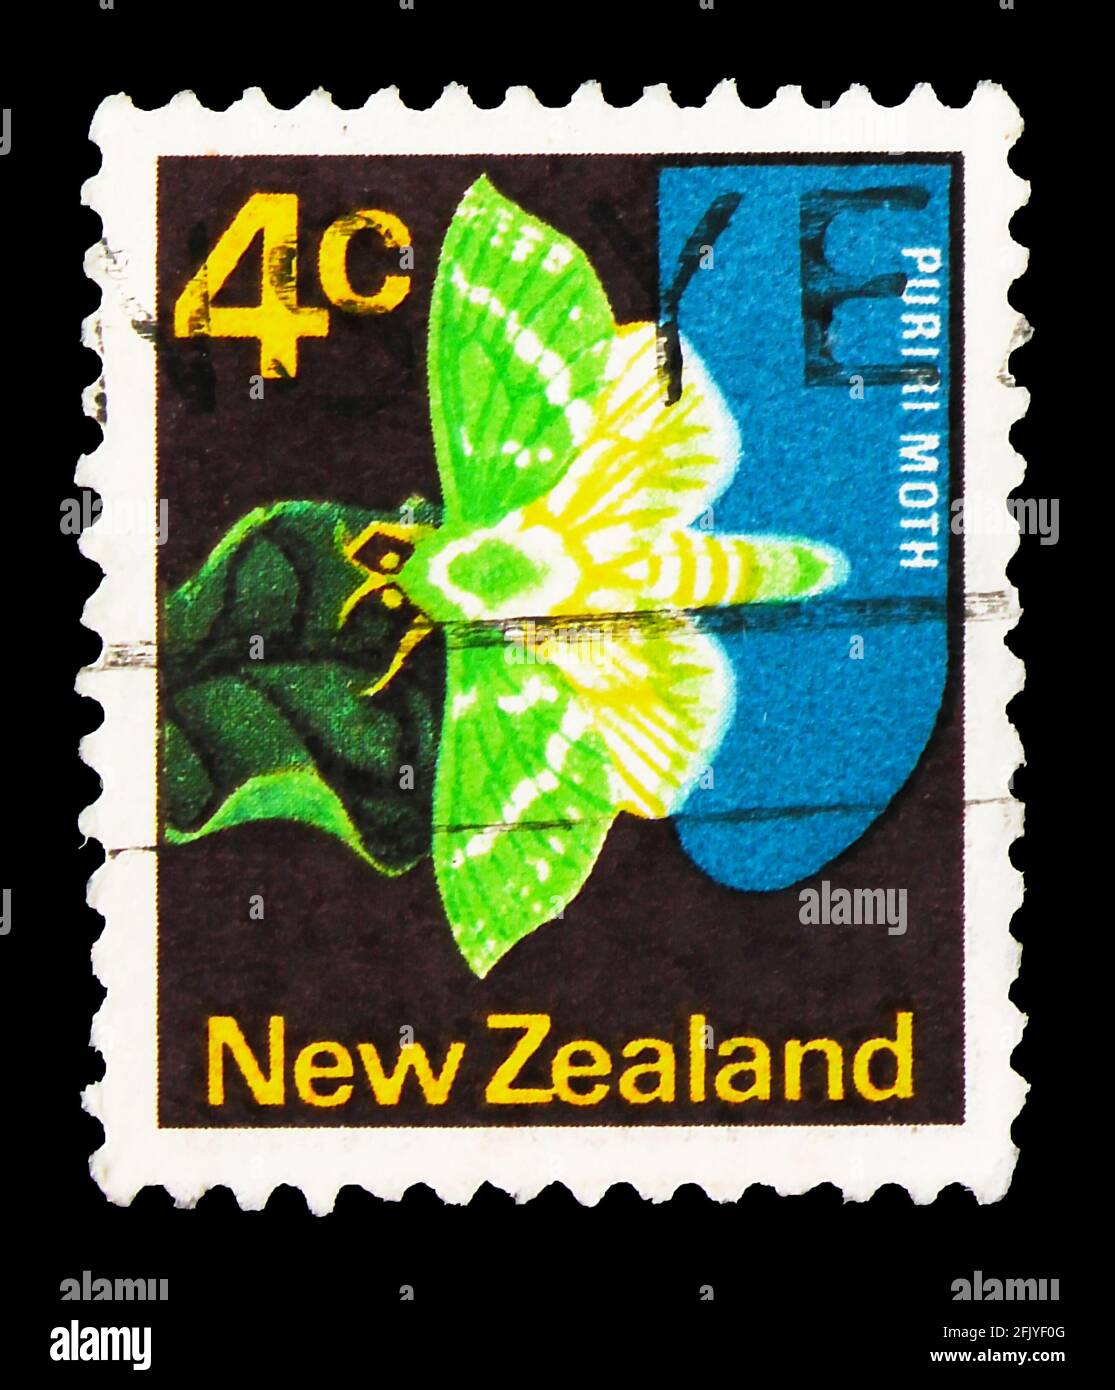 MOSCOW, RUSSIA - SEPTEMBER 27, 2019: Postage stamp printed in New Zealand shows Great Ghost, Puriri moth (Hepialus virescens), Definitives serie, circ Stock Photo